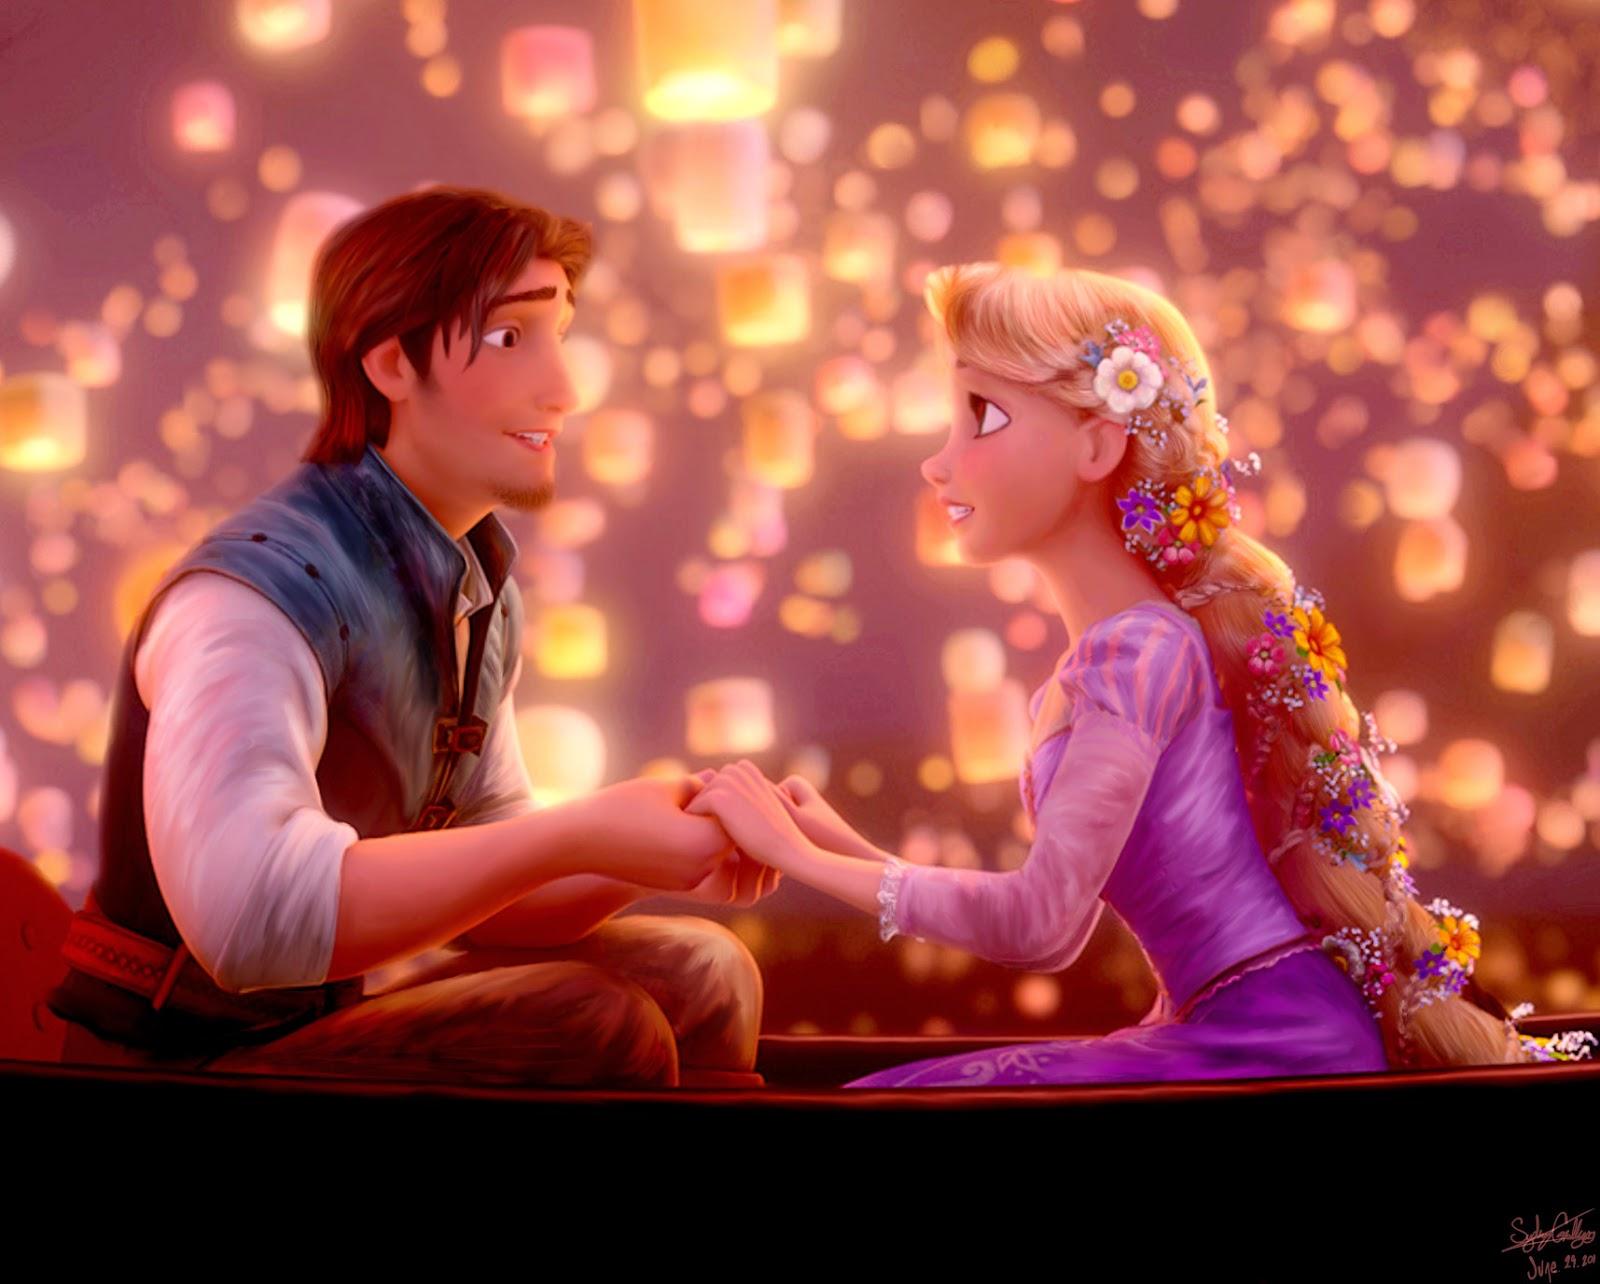 tangled full movie in english hd free download